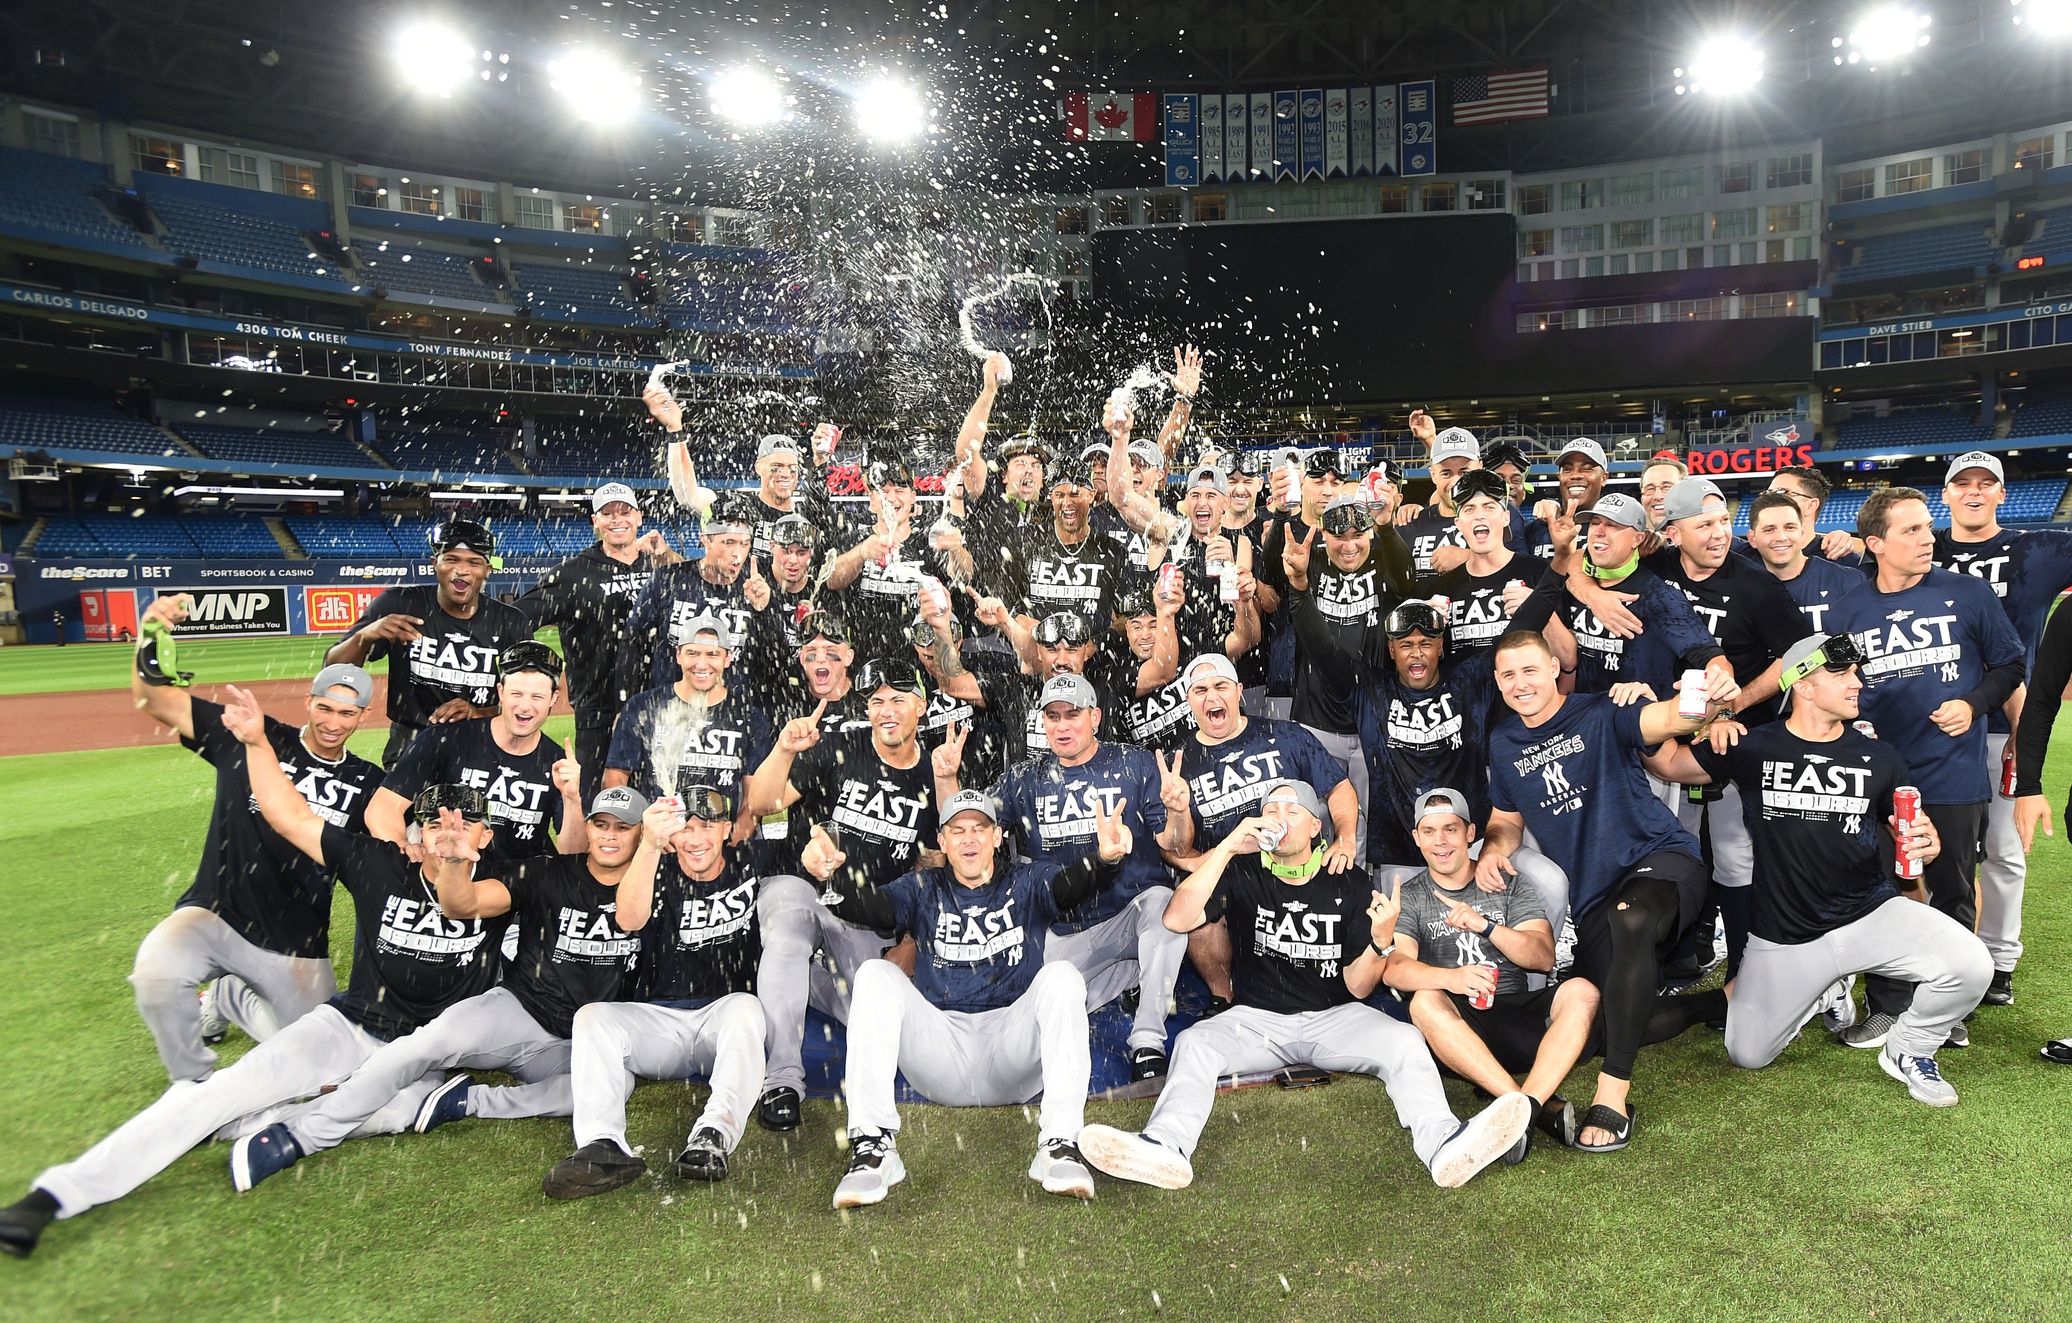 Yankees Celebrate Division Title, Reflecting on Journey That 'Made Us Stronger' BVM Sports